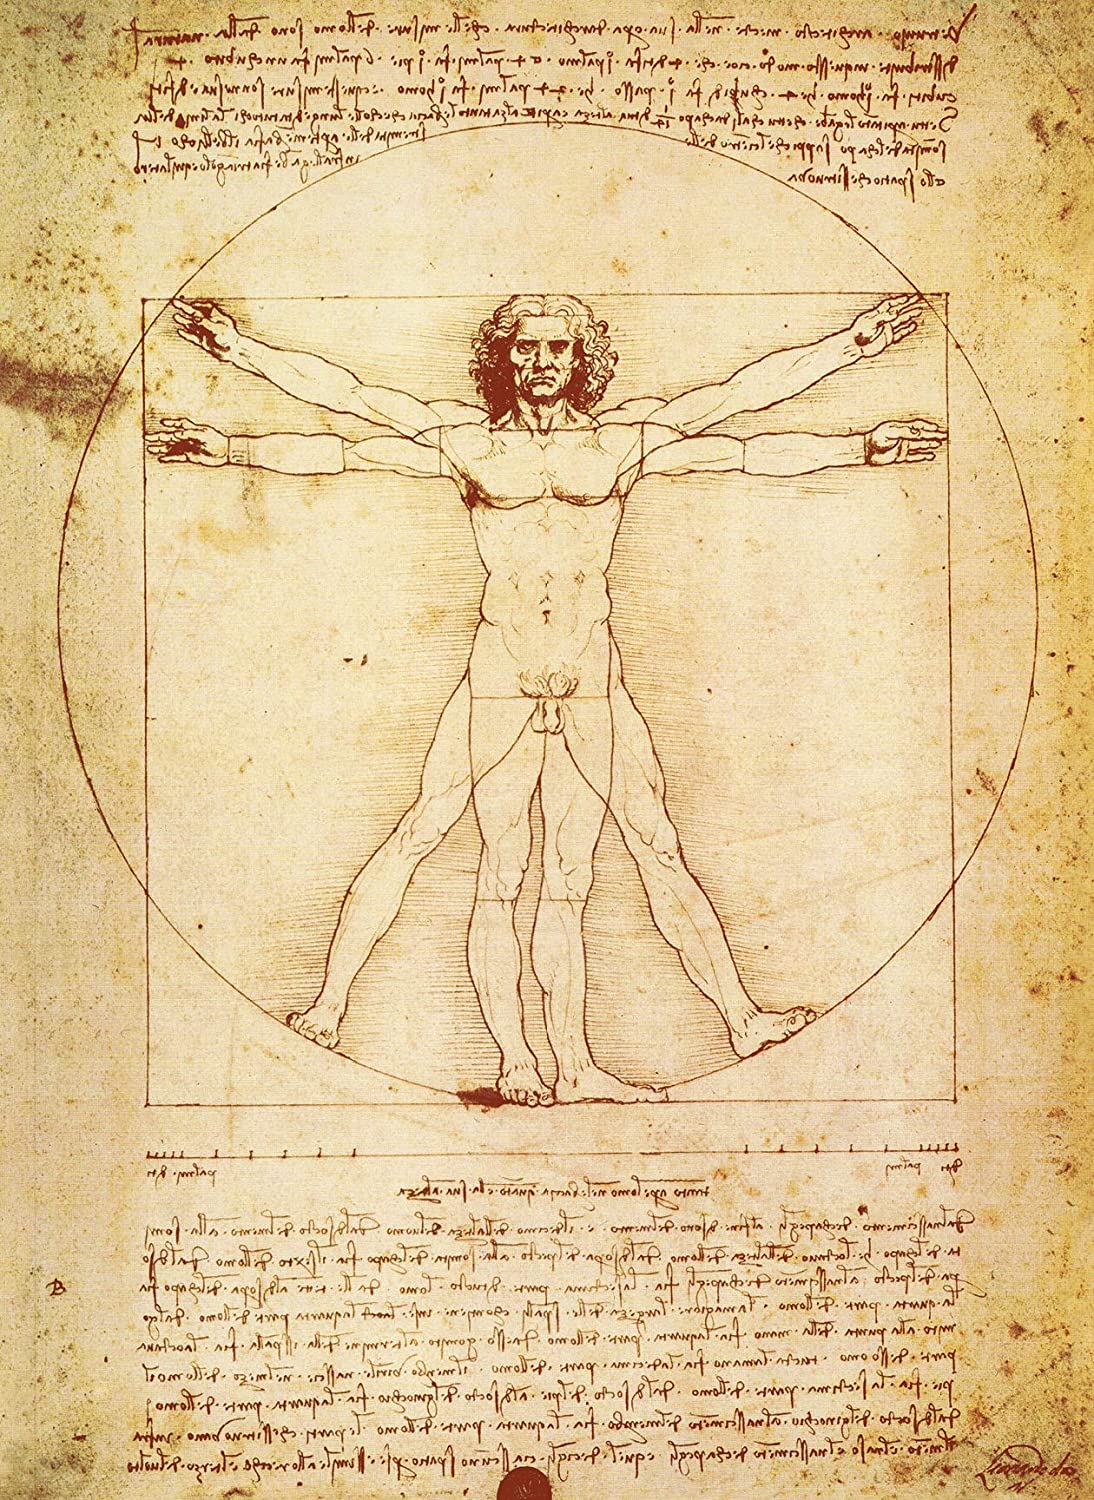 Man is technology, as is every creature, plant, and the thing that replicates itself on the planet. We are a form of technology used by genes to continue their existence. Source - Human Body by Leonardo Da Vinci.